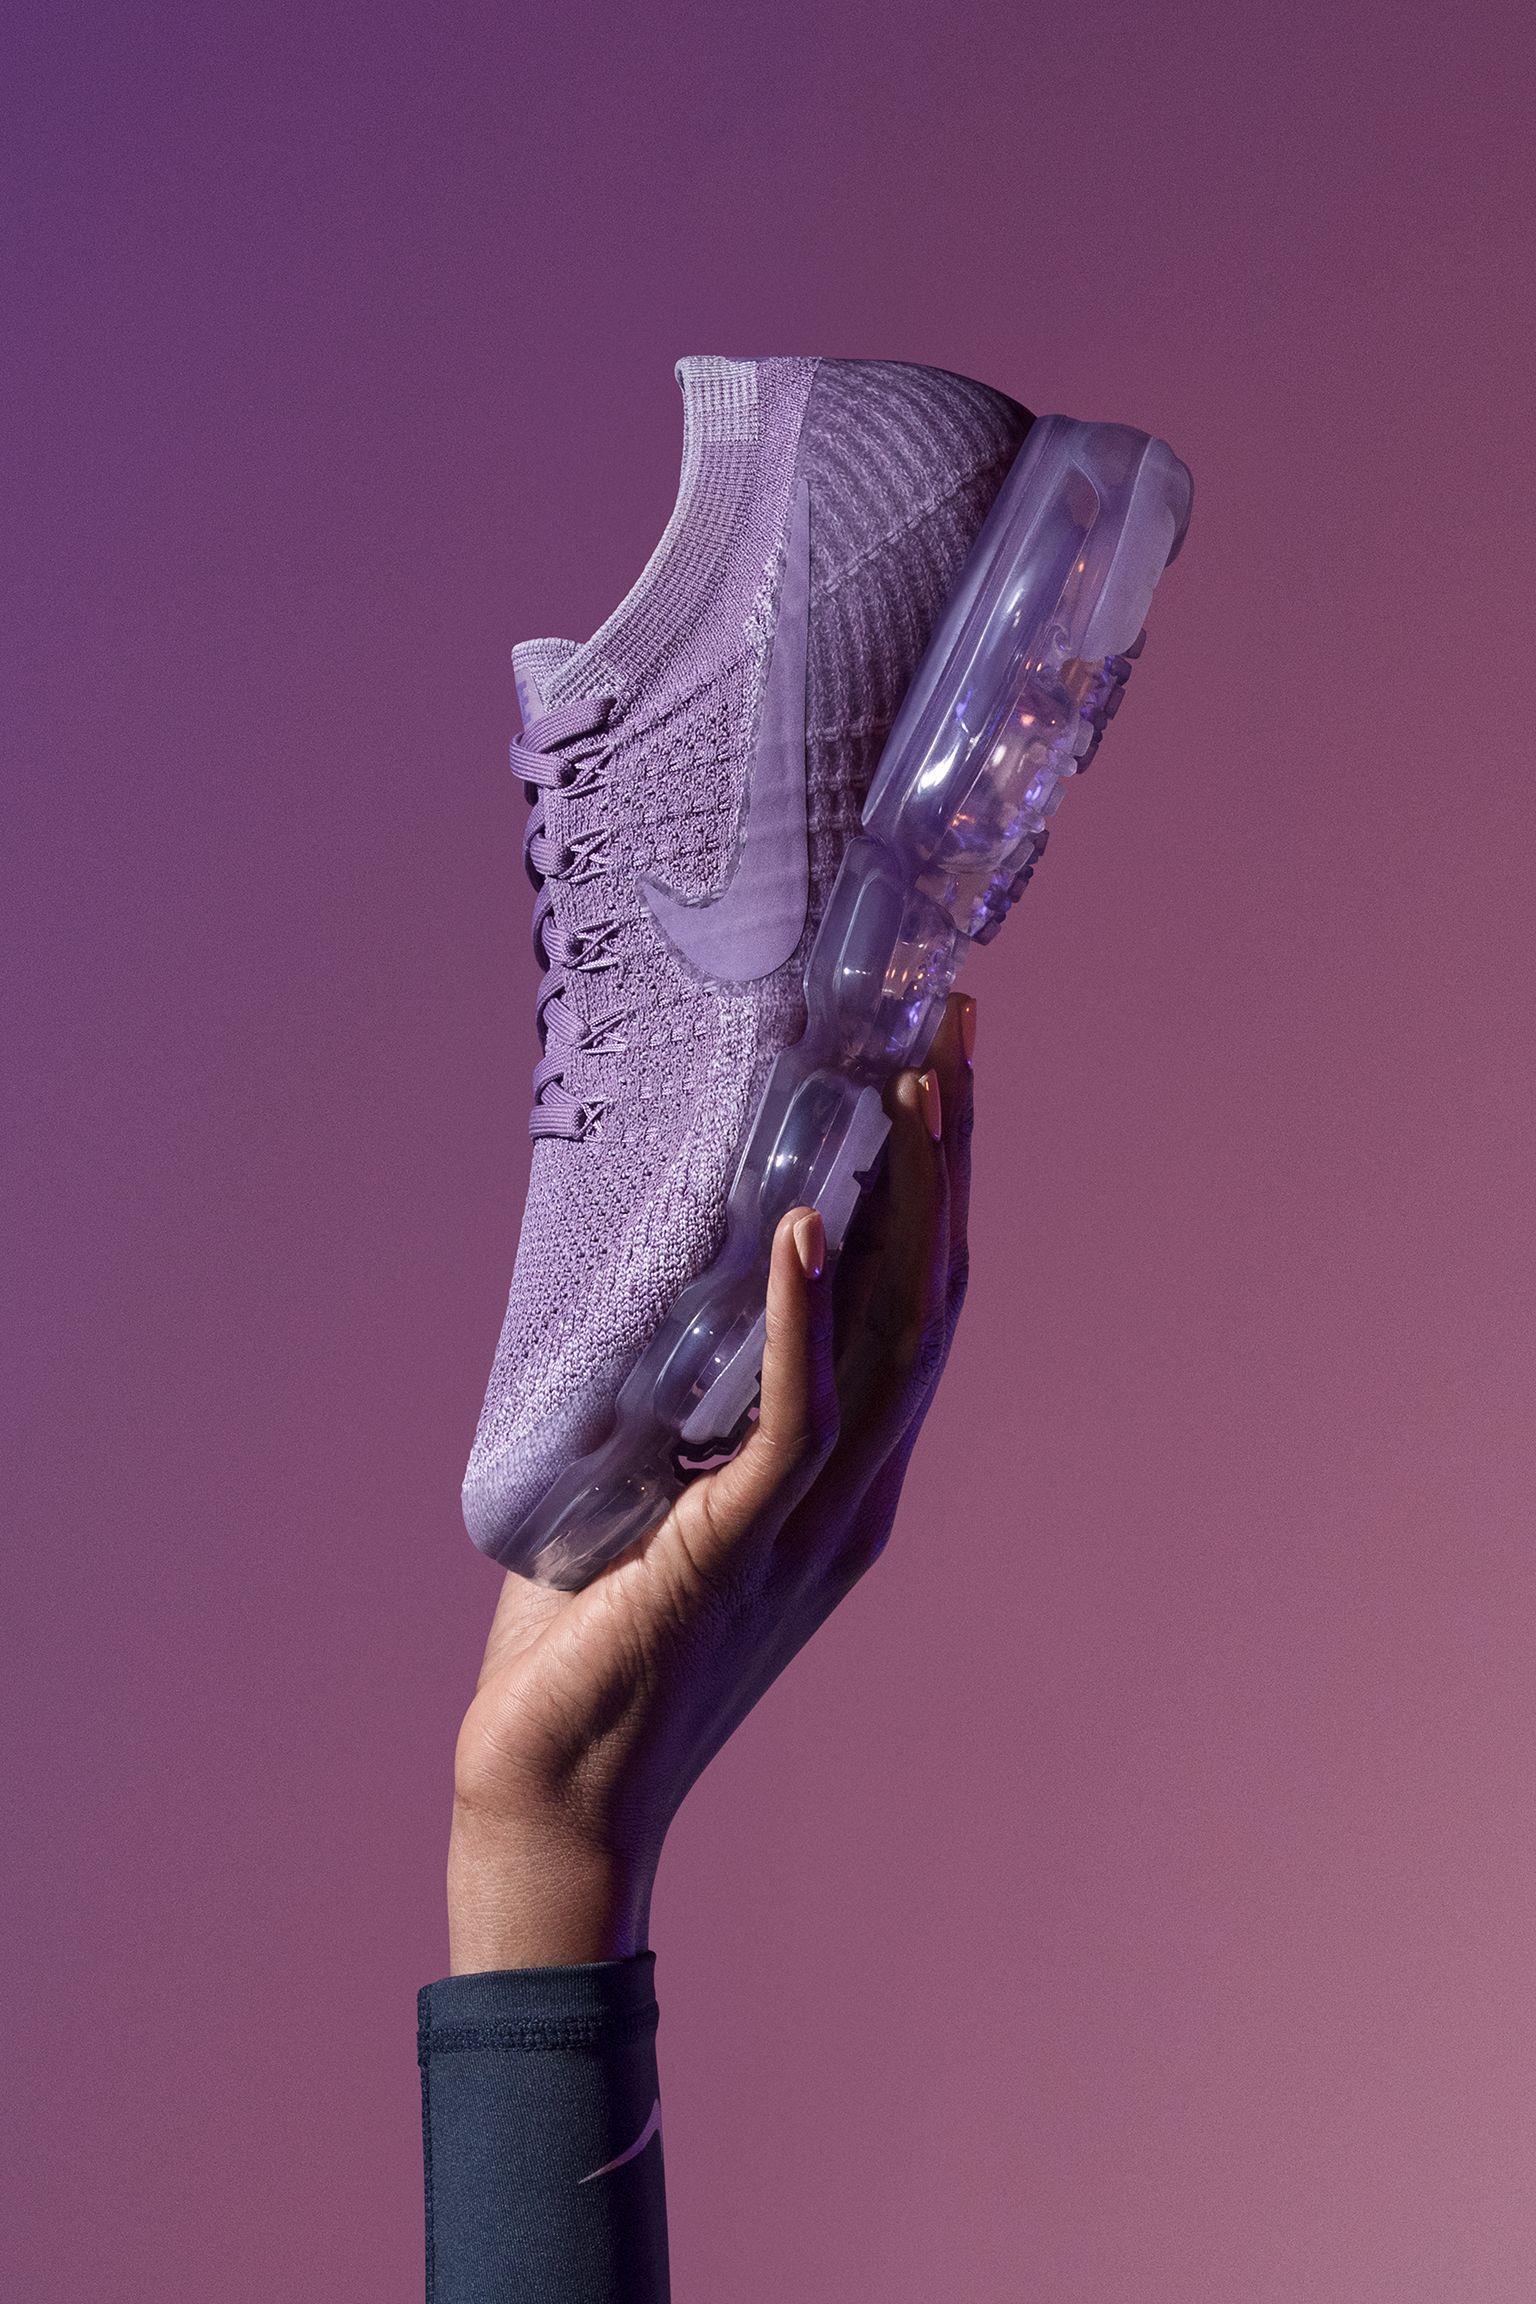 Nike Air VaporMax Flyknit to Night "Violet Dust" para mujer. Nike SNKRS ES